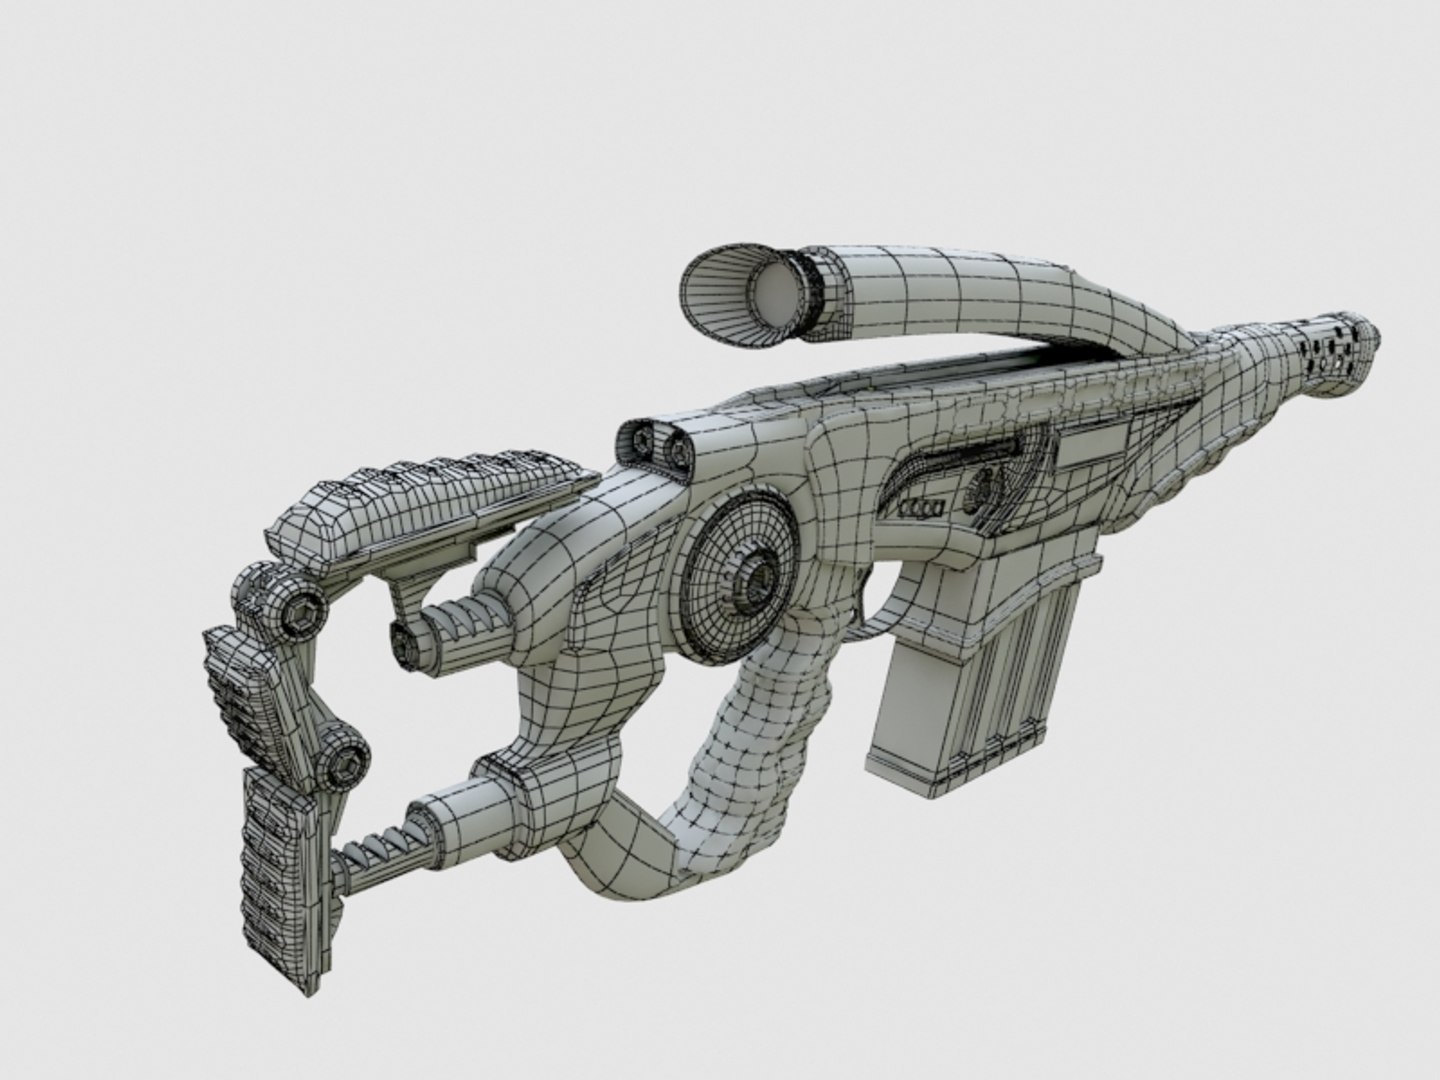 3d model of weapons sci fi rifle